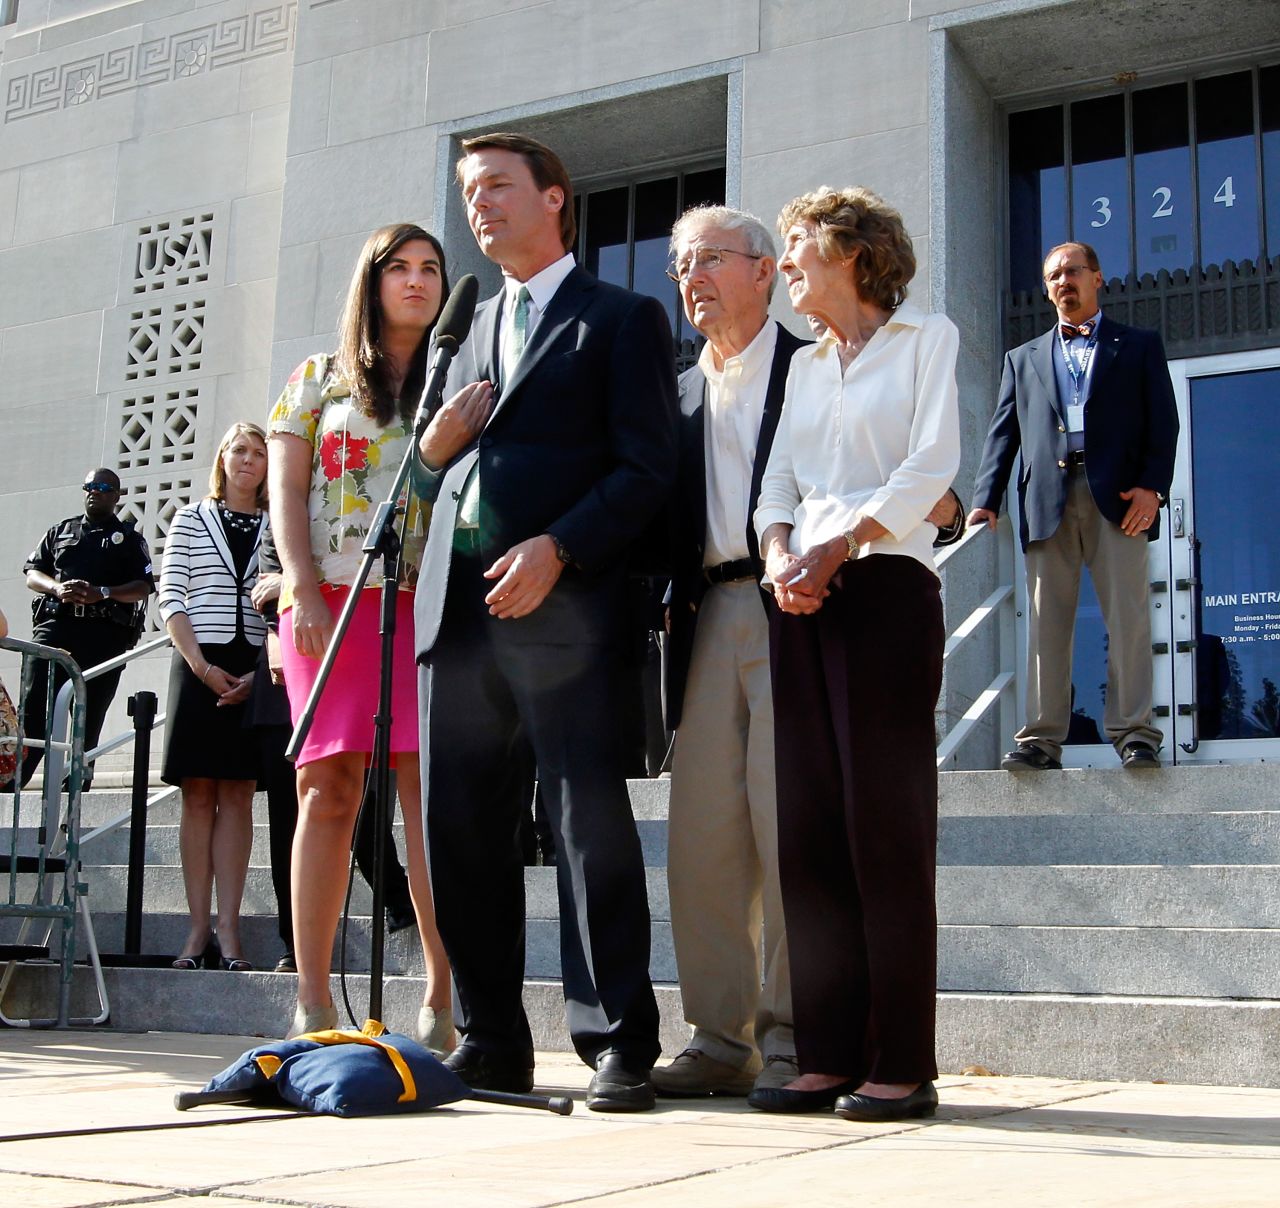 Edwards addresses the media after his acquittal and mistrial, with his daughter Cate and his parents Wallace and Bobbie Edwards at his side, outside the Greensboro courthouse on Thursday, May 31, 2012. After nine days of deliberation, a jury acquitted Edwards on one count but deadlocked on five other counts in his corruption trial. It's unclear what the Justice Department will do next, but Edwards says his years of service aren't over.